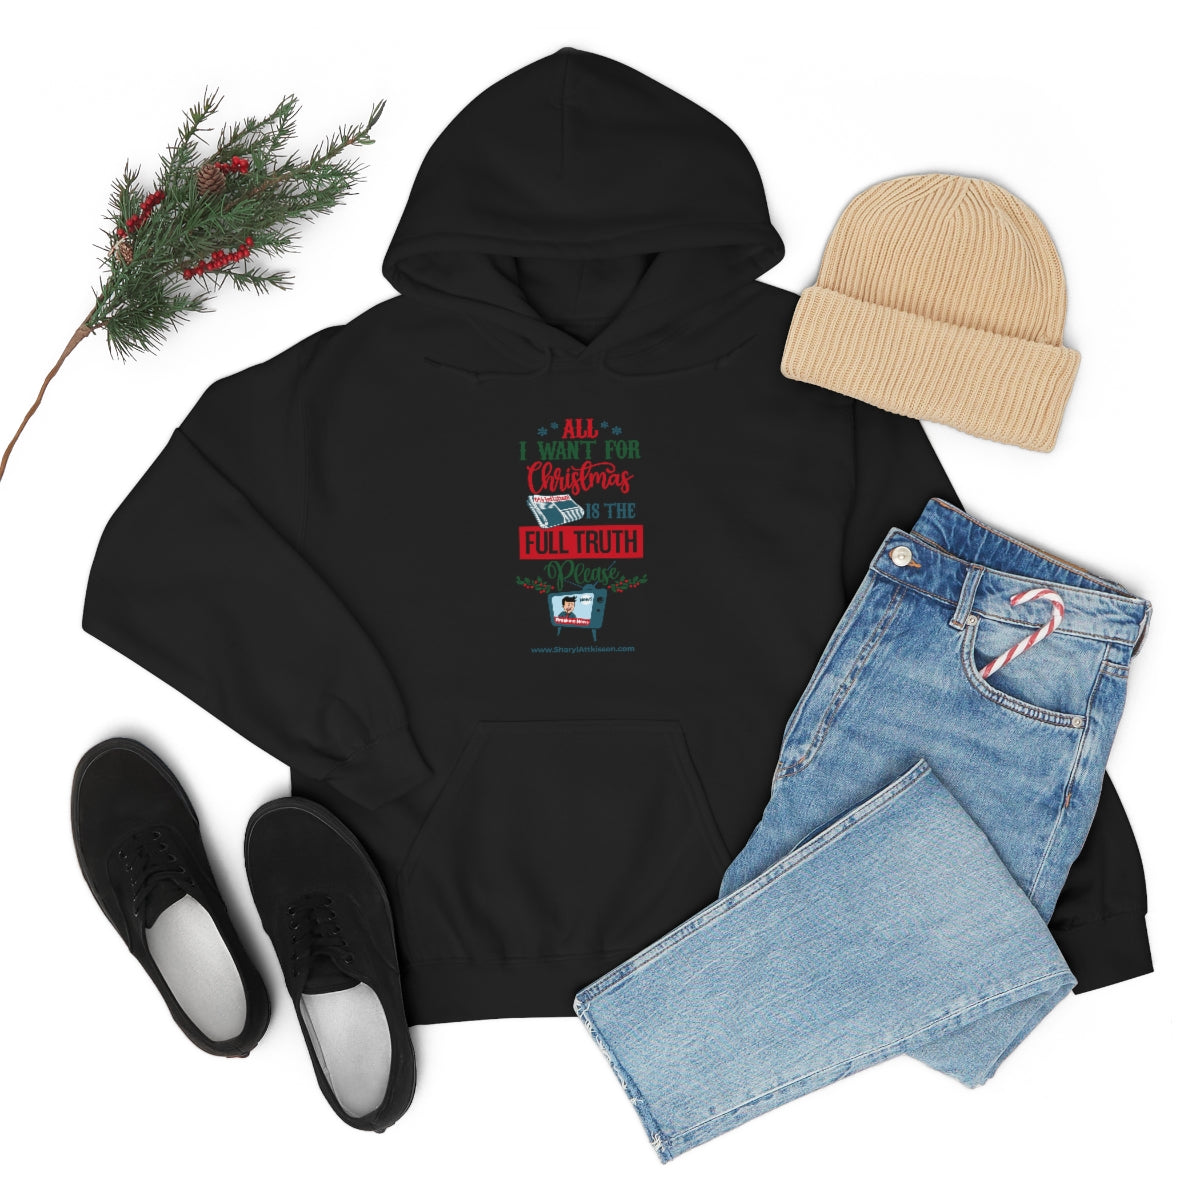 'All I Want for Christmas is the Full Truth, Please' Unisex Hooded Sweatshirt (8 colors)